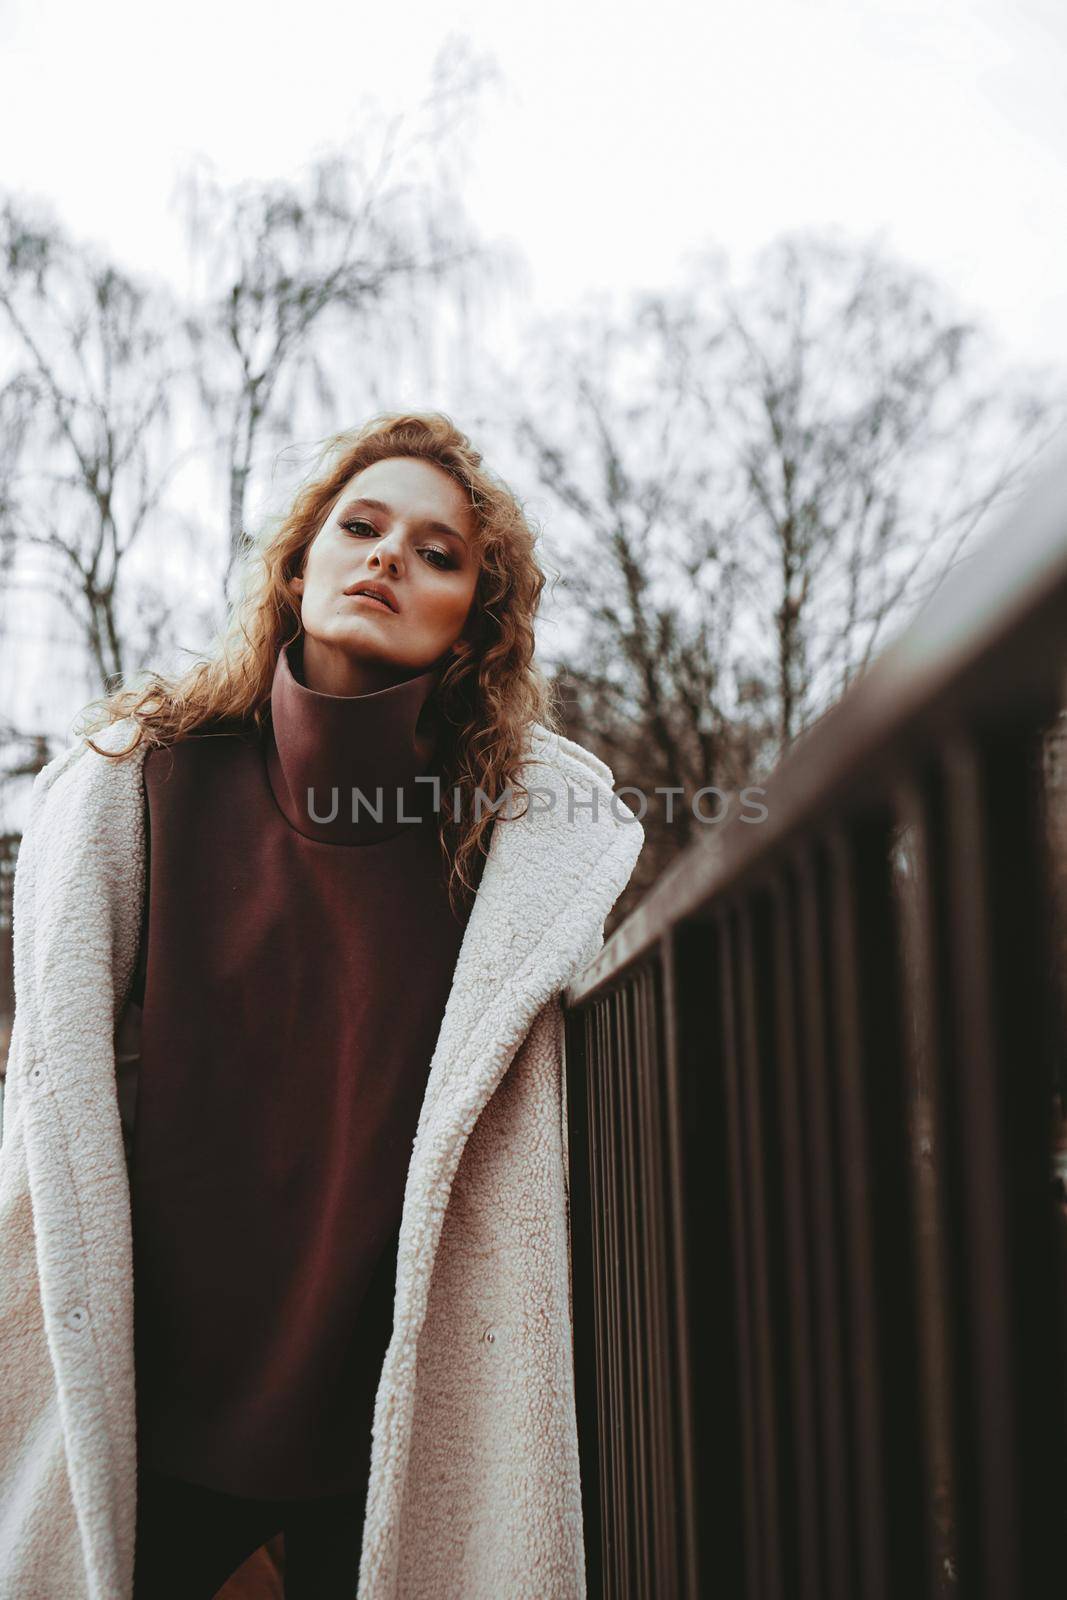 A girl with red curly hair in a white coat poses on outdoor parking in cold autumn. City Style - Urban